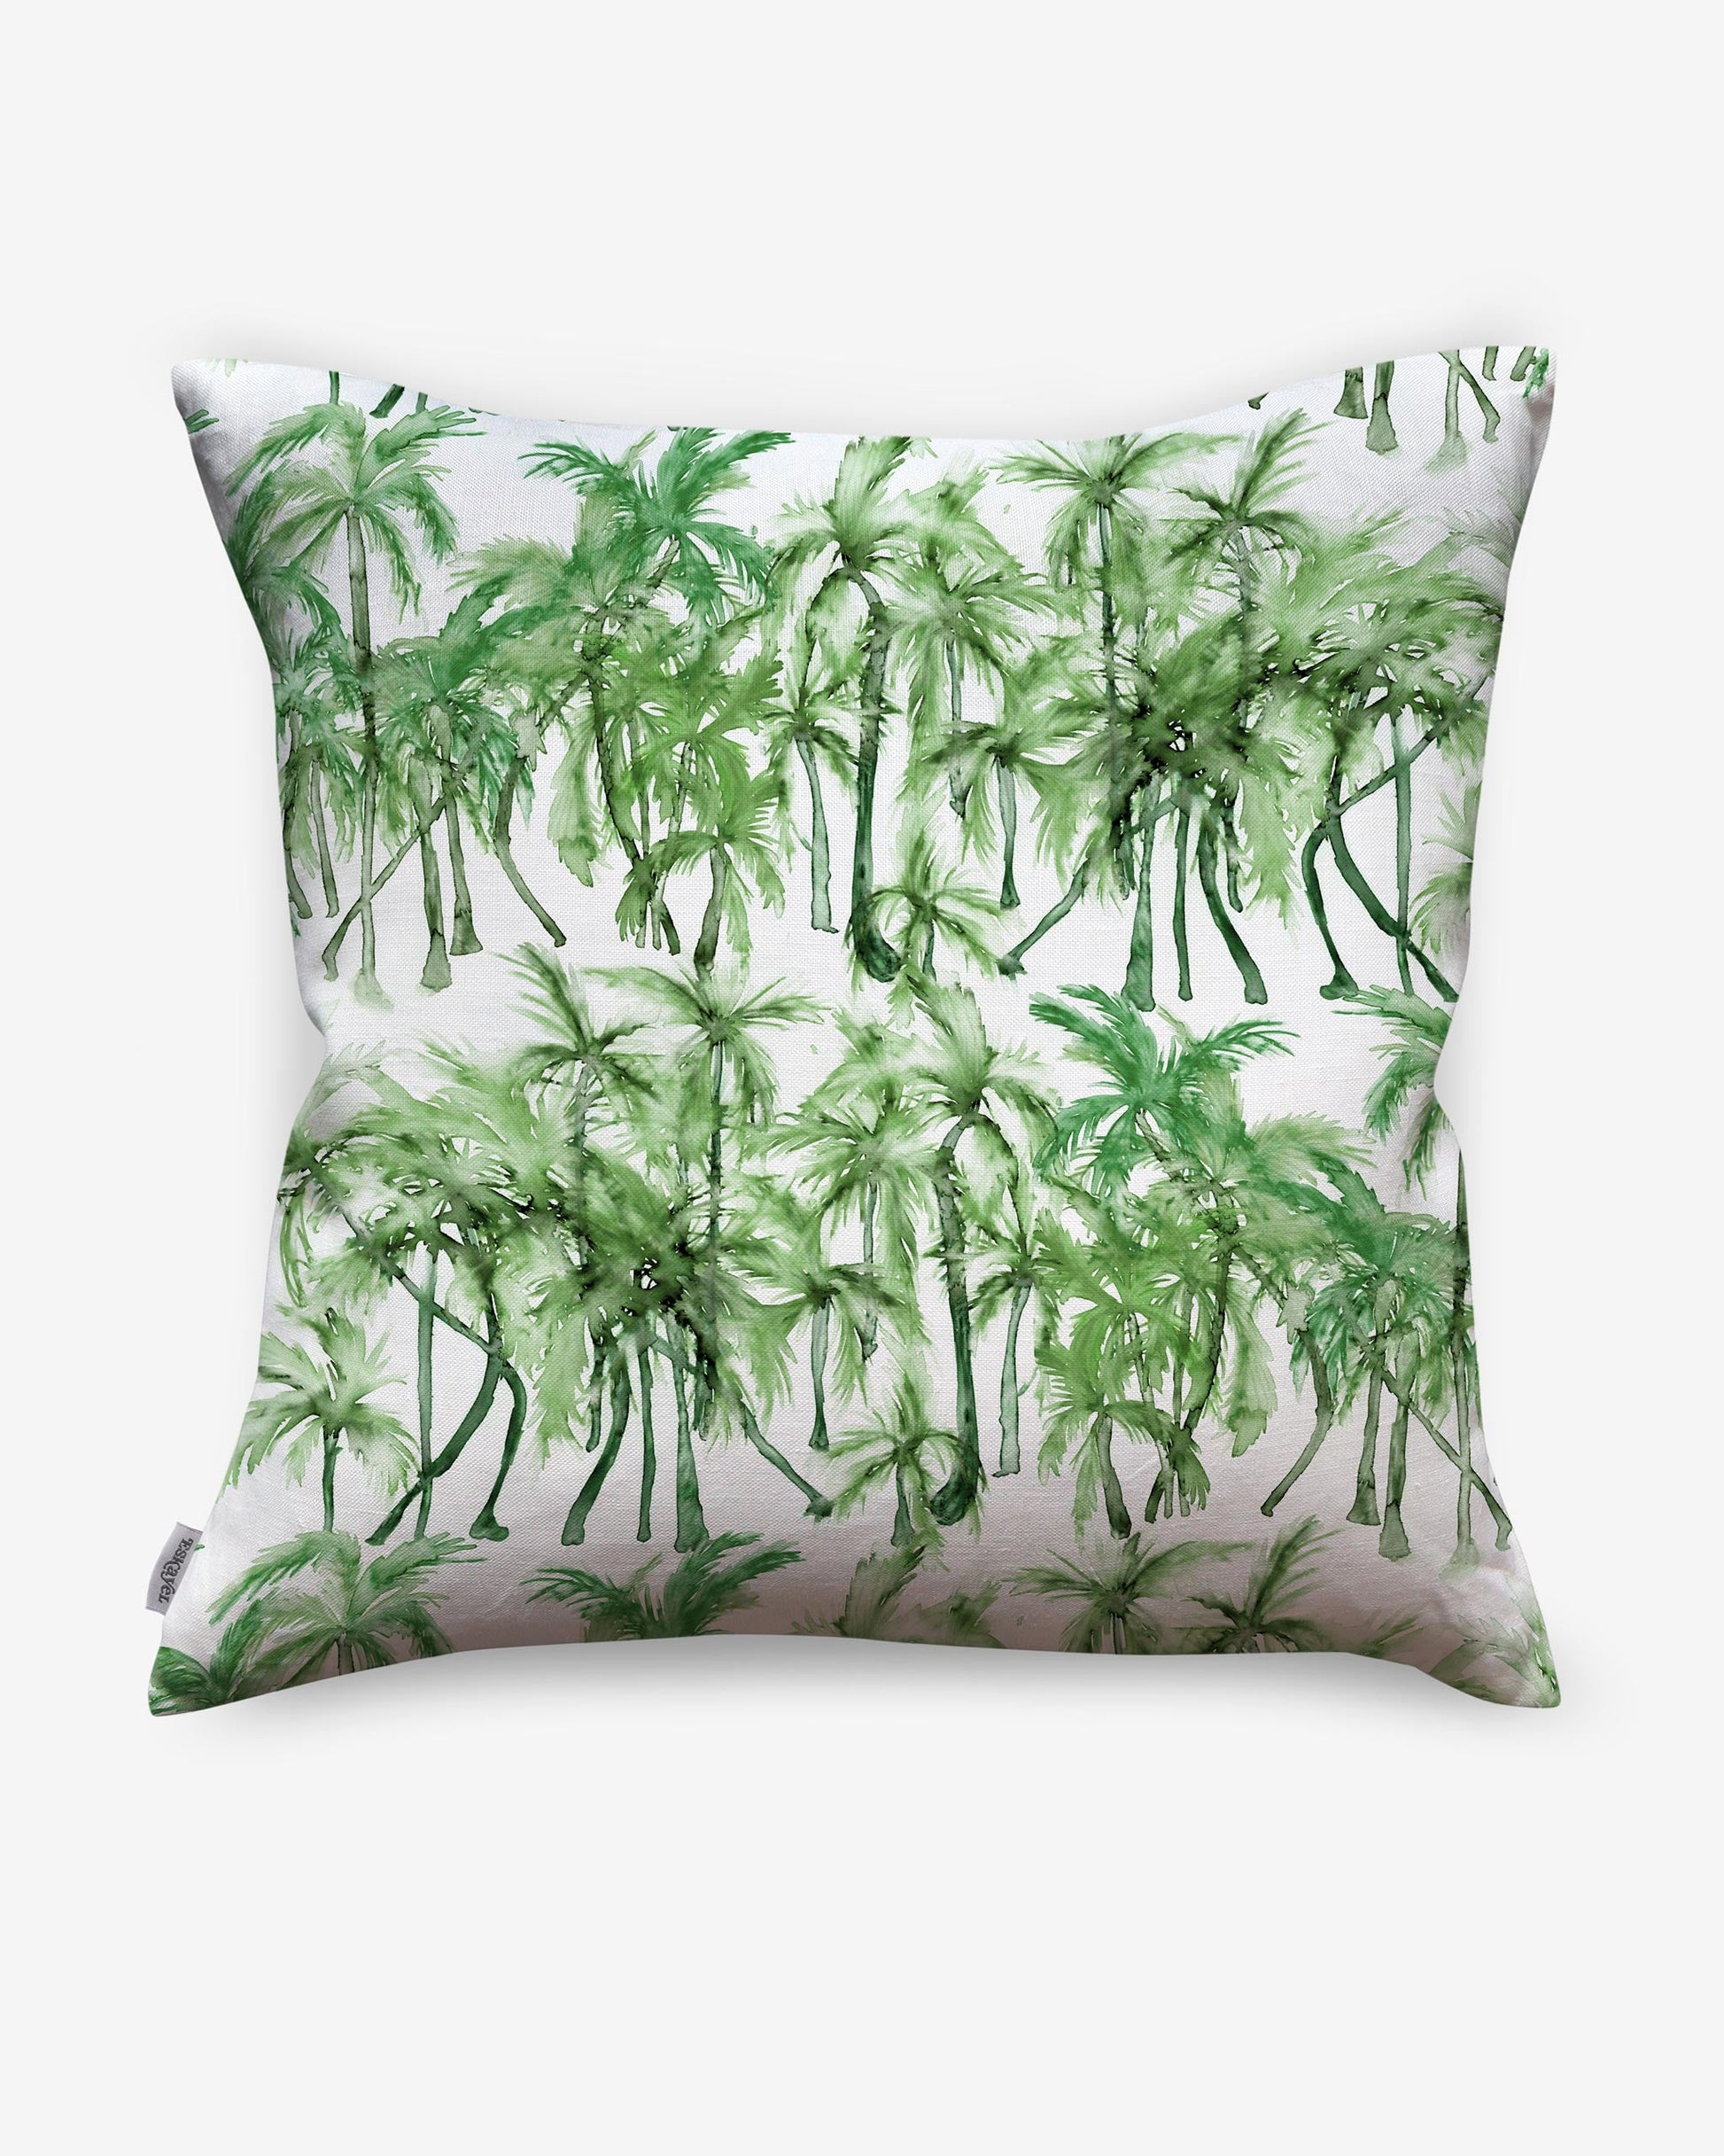 A green luxury fabric Palm Dance Pillow Chloros with palm trees on it